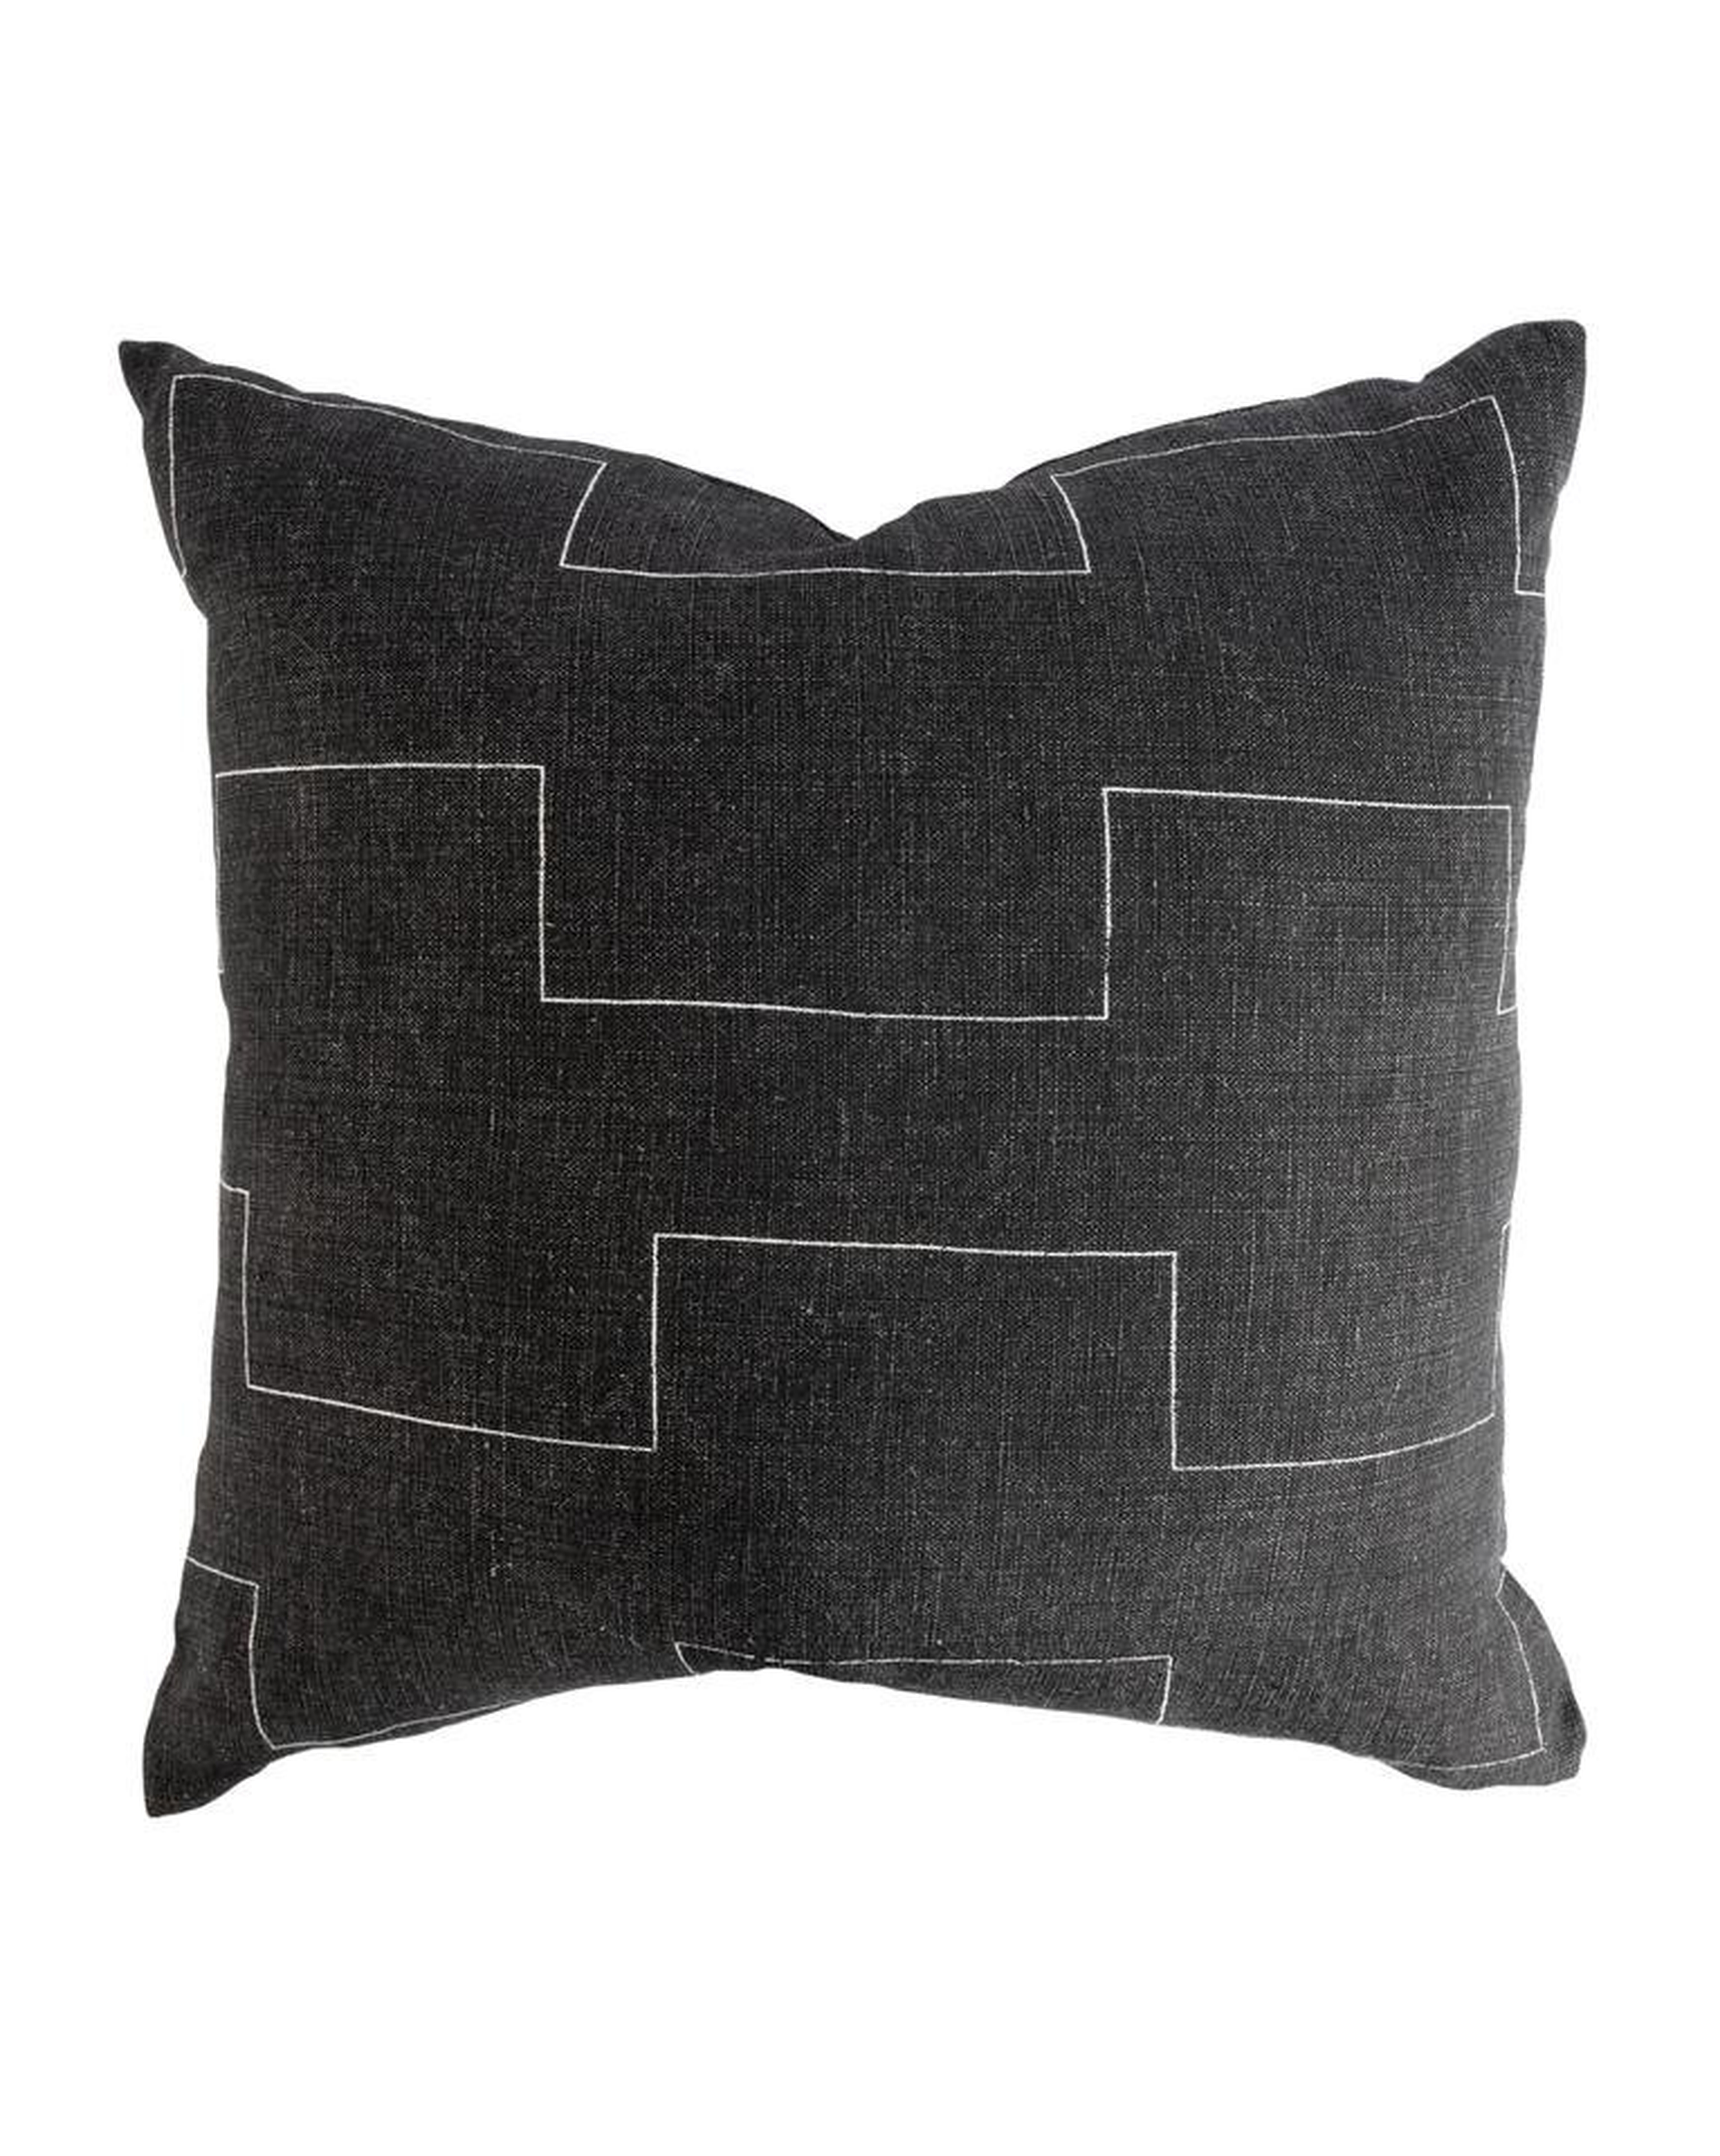 HAJI PILLOW WITH DOWN INSERT - McGee & Co.